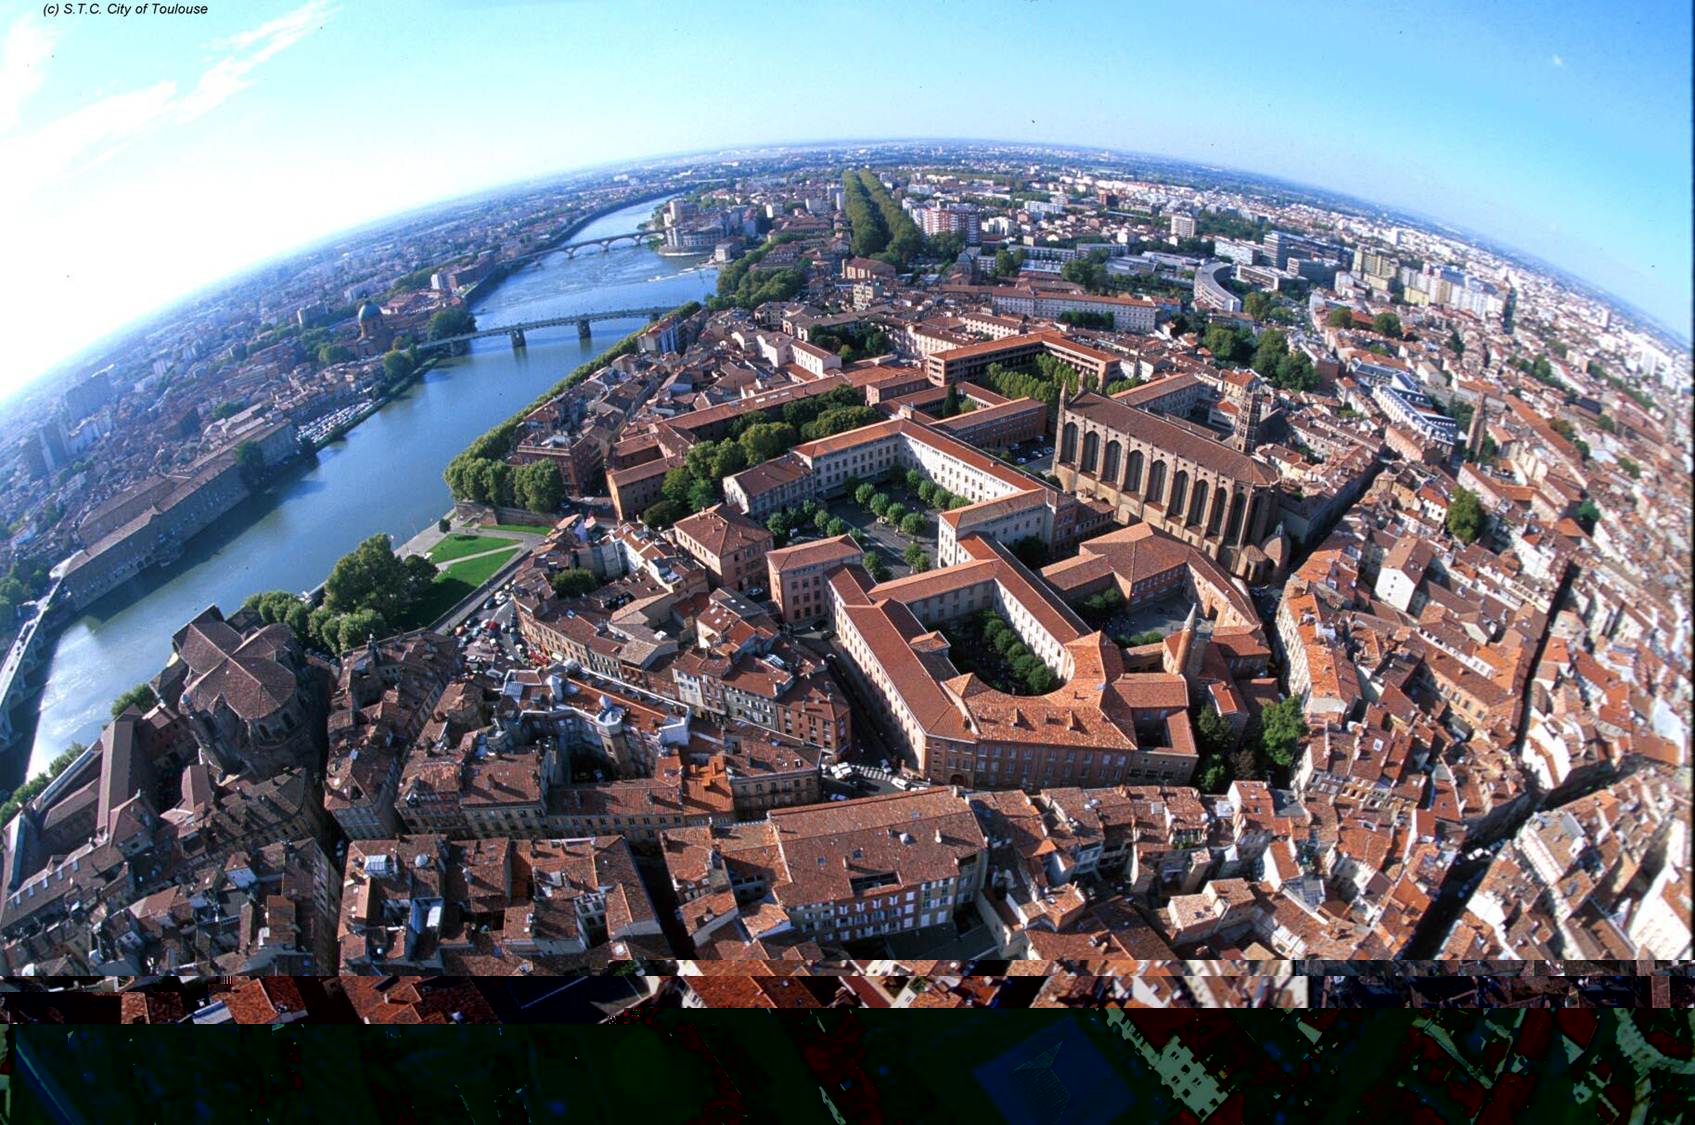 Toulouse from the sky